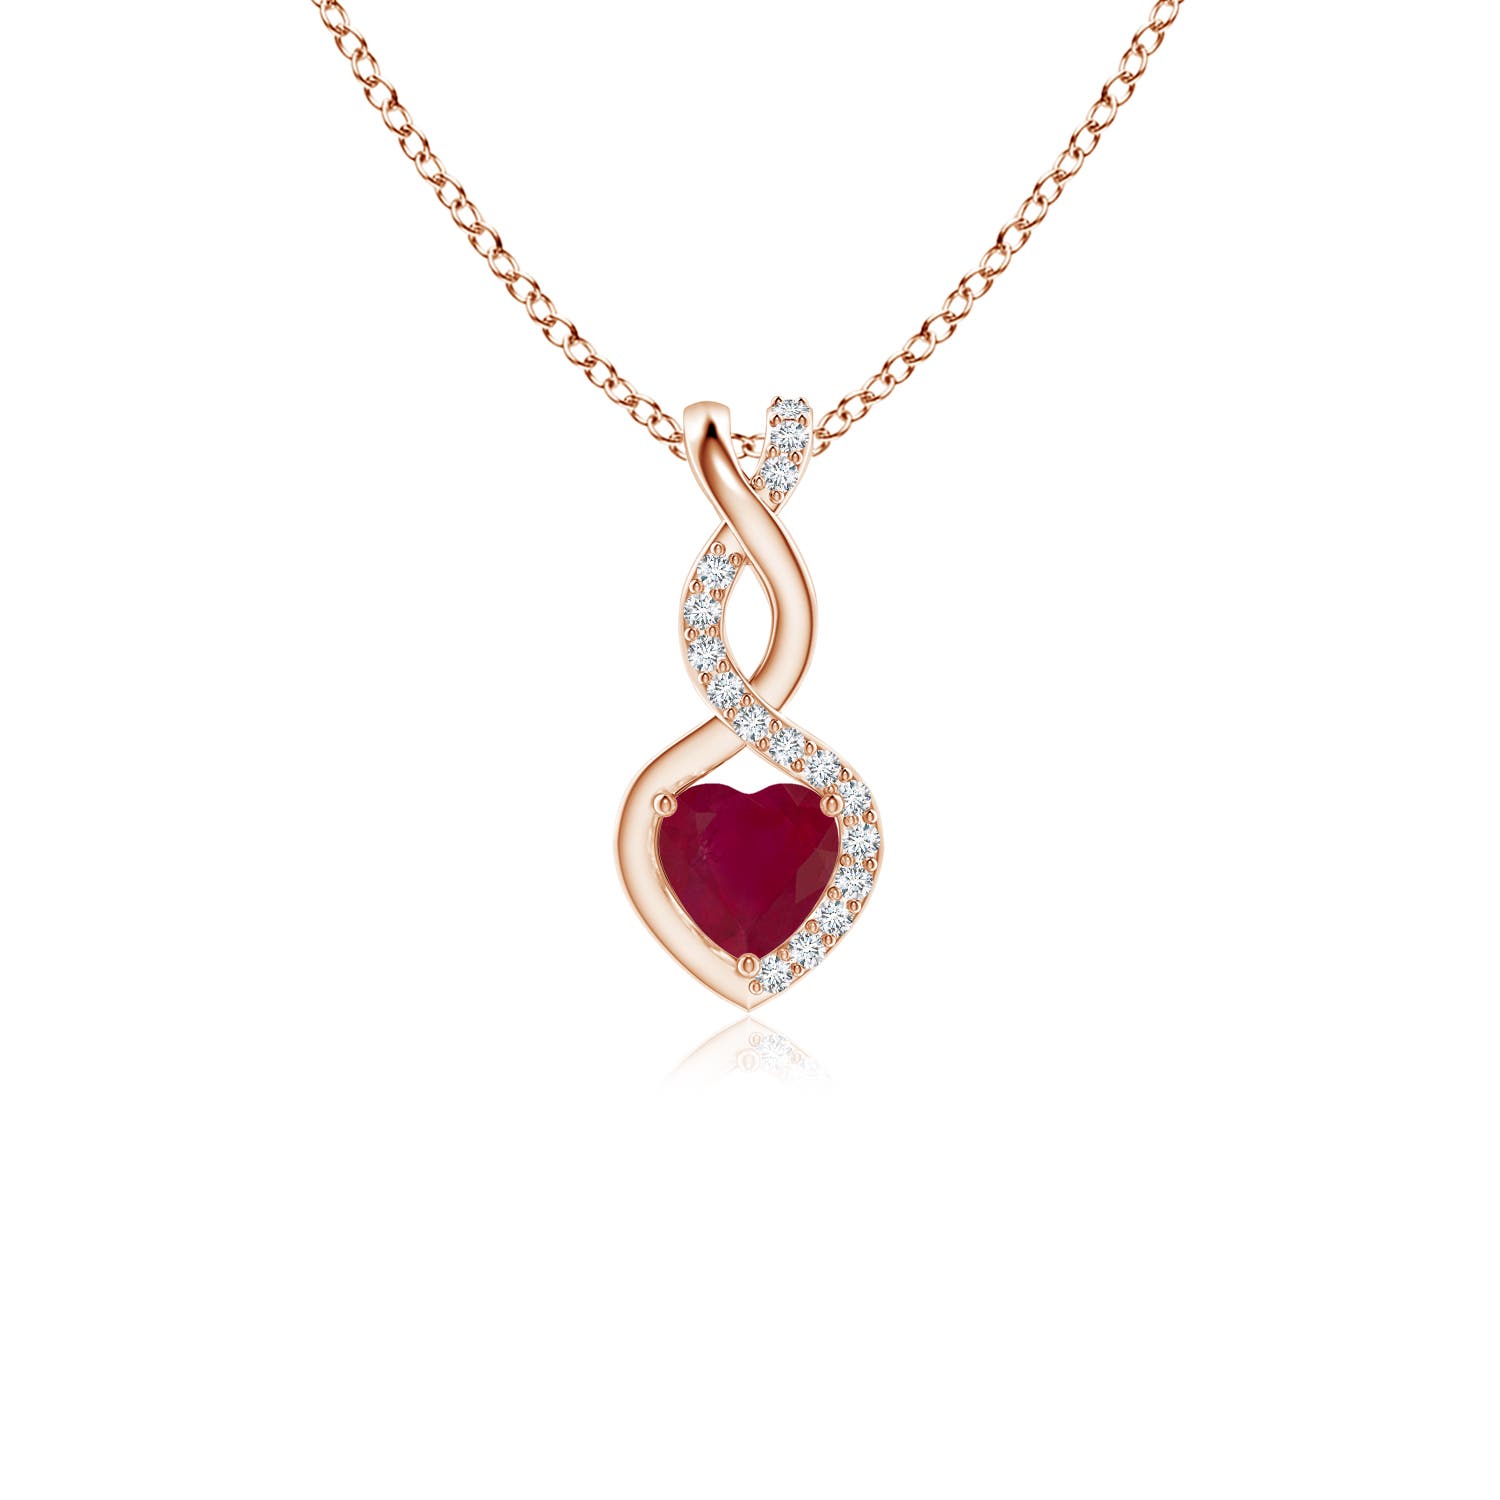 A - Ruby / 0.35 CT / 14 KT Rose Gold